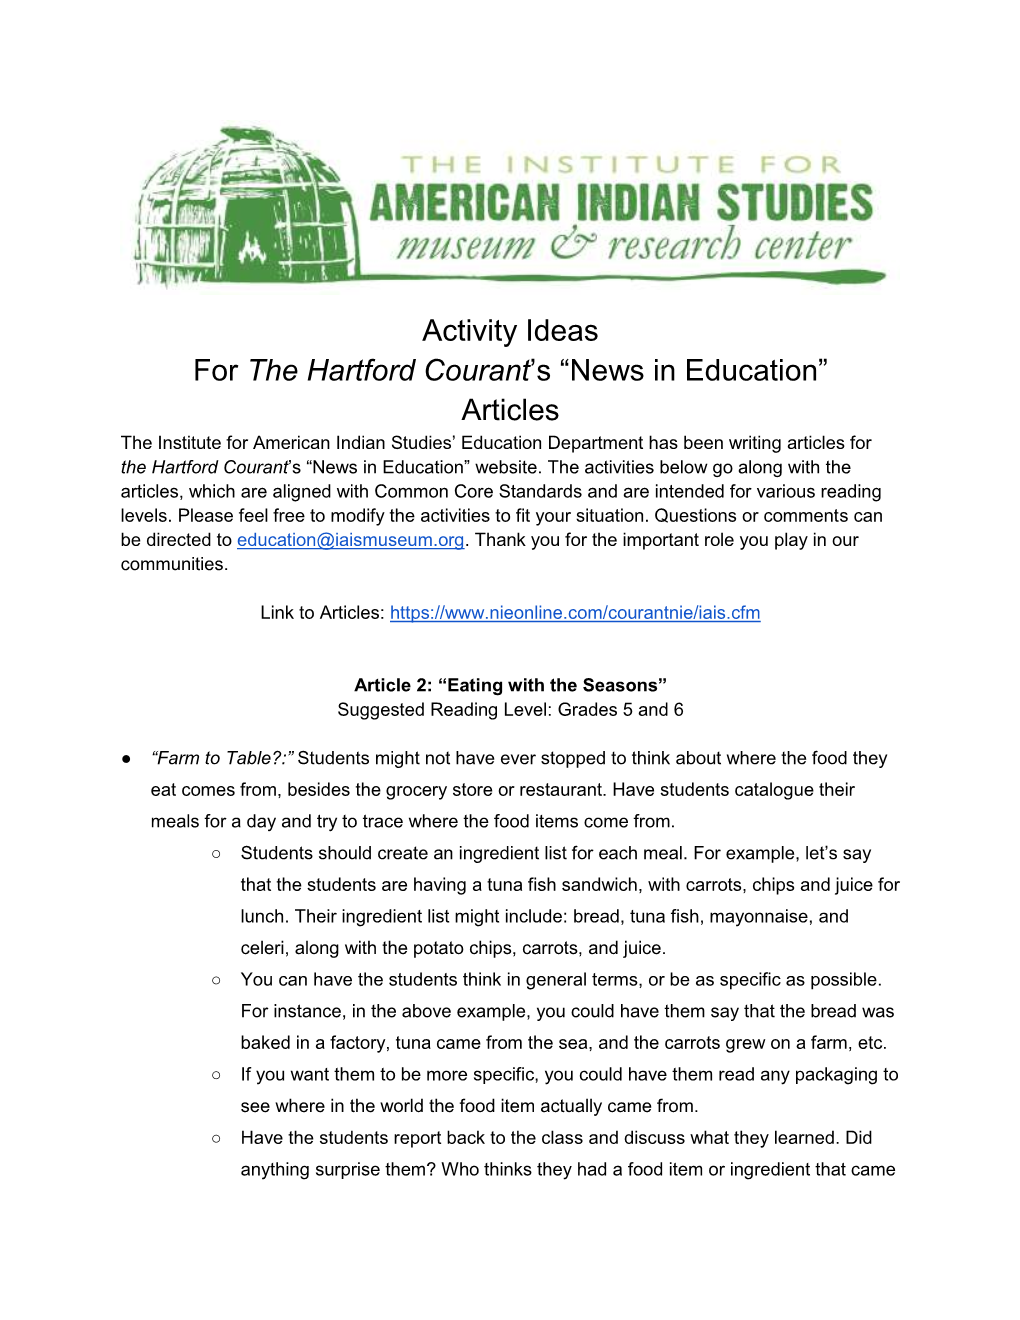 Hartford Courant NIE Article 2 Activity